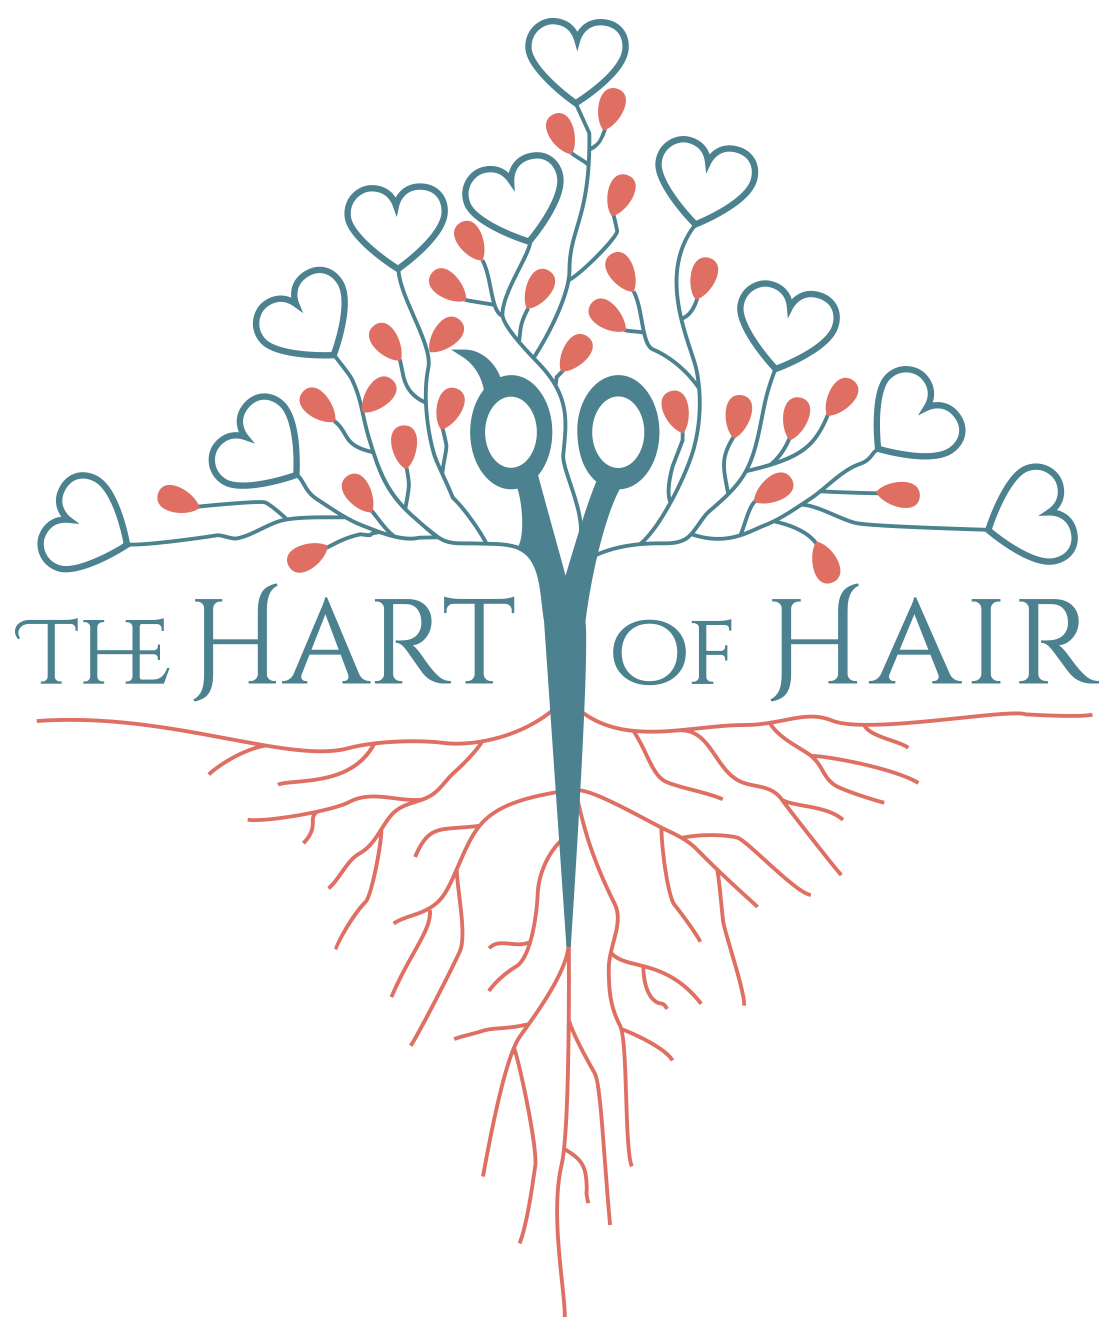 The HART of Hair